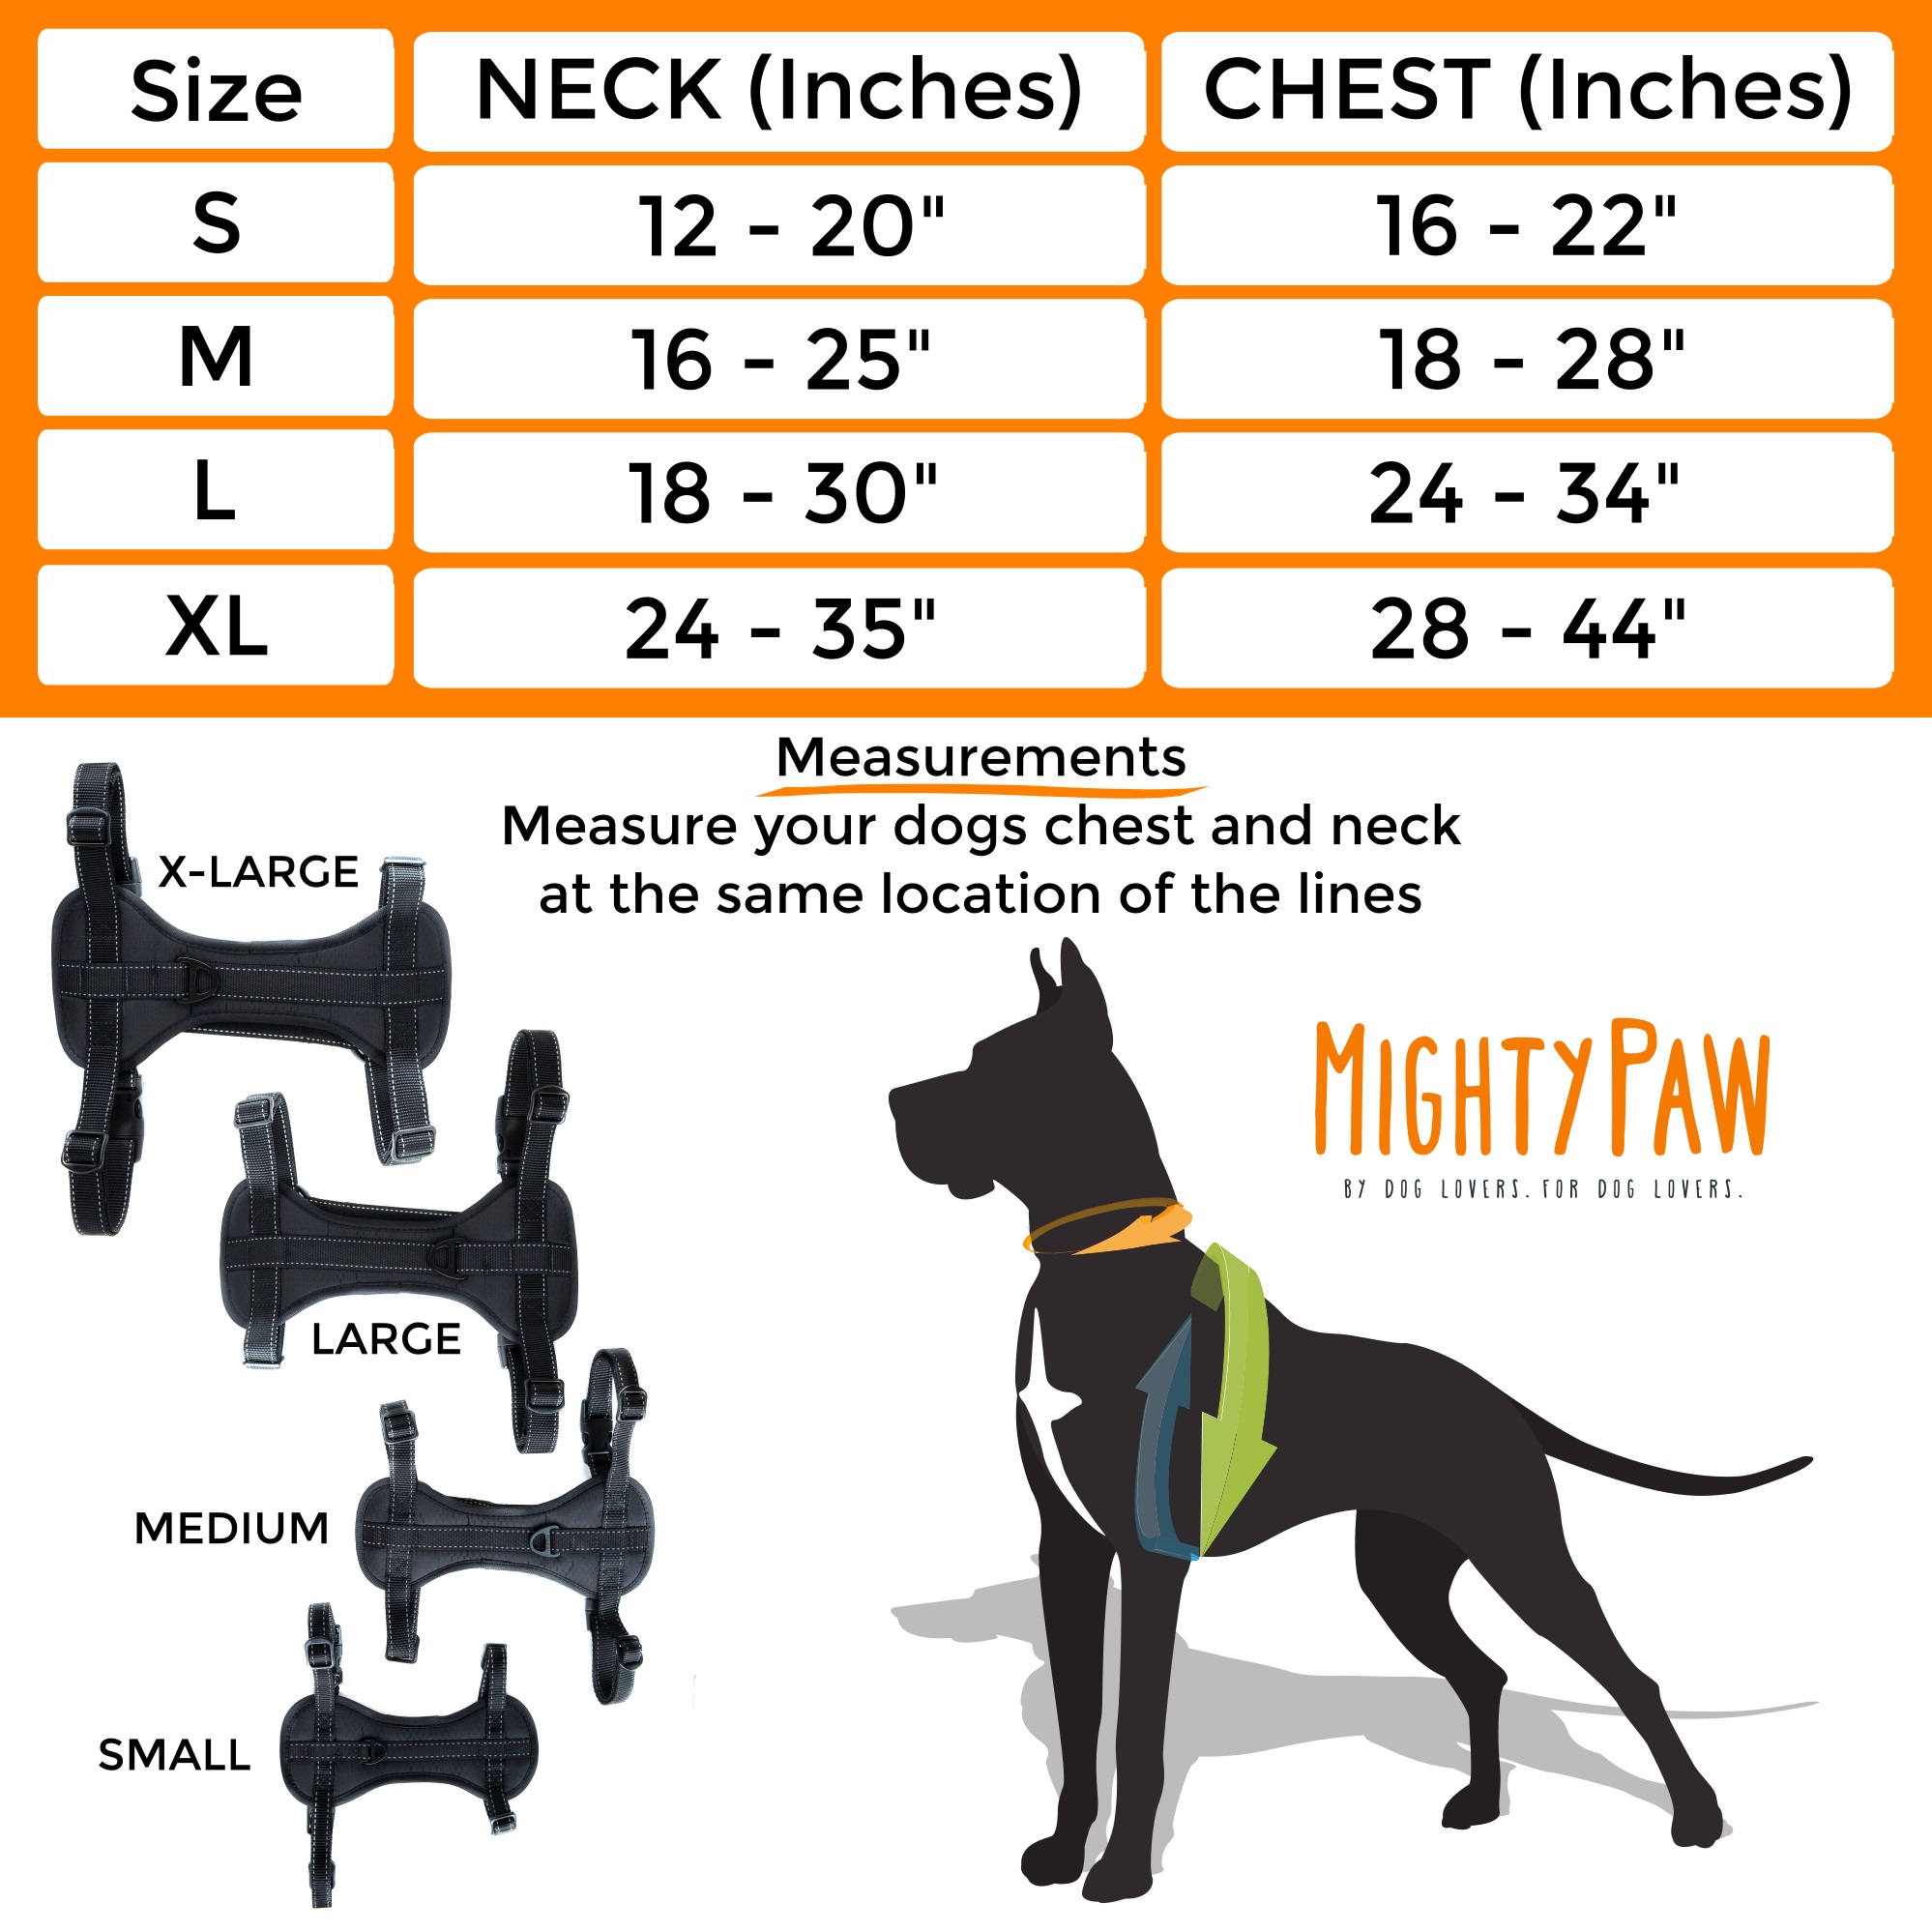 Mighty Paw All Metal Harness